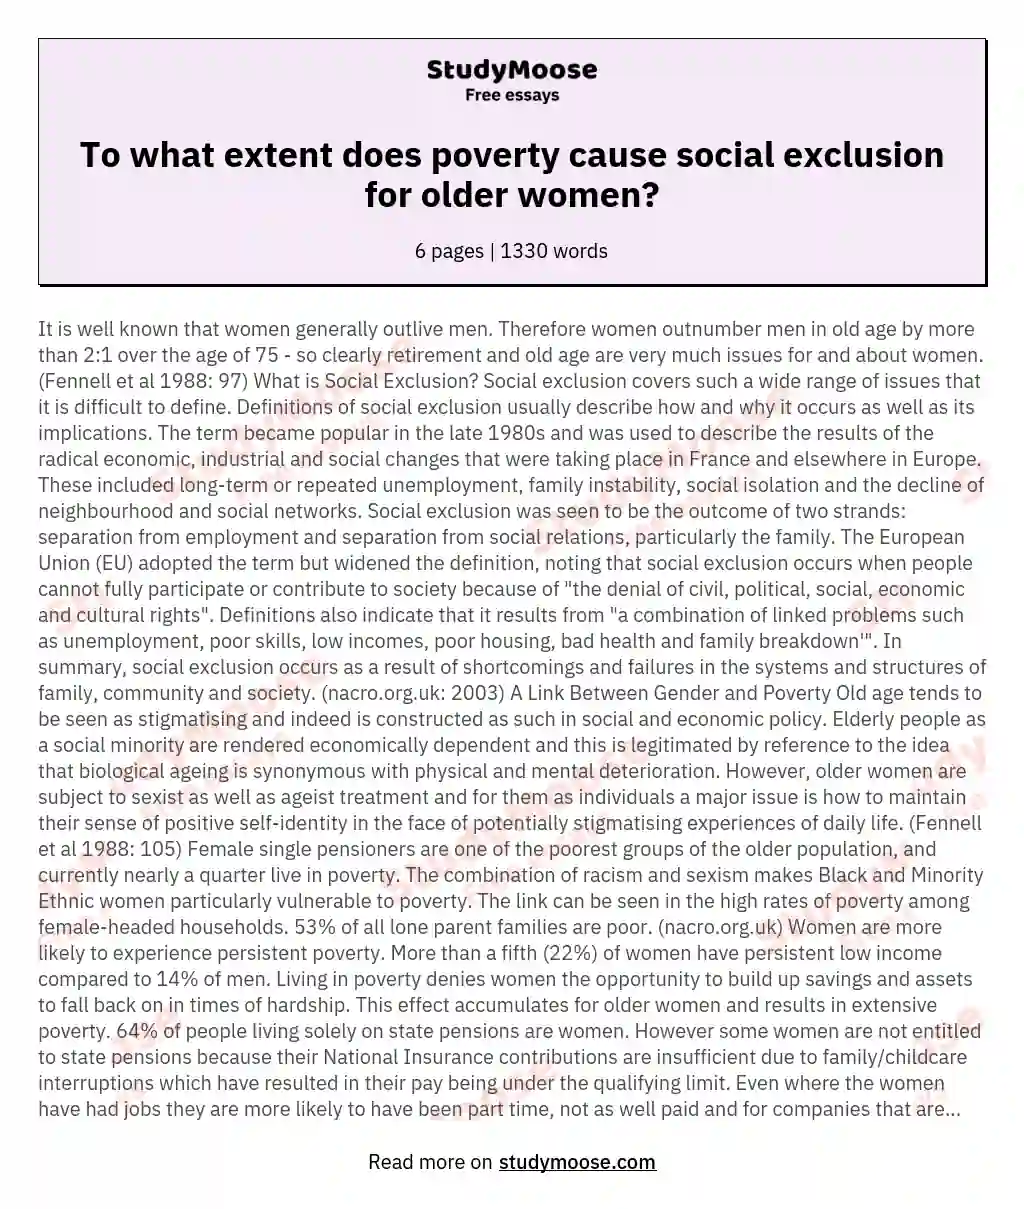 To what extent does poverty cause social exclusion for older women?